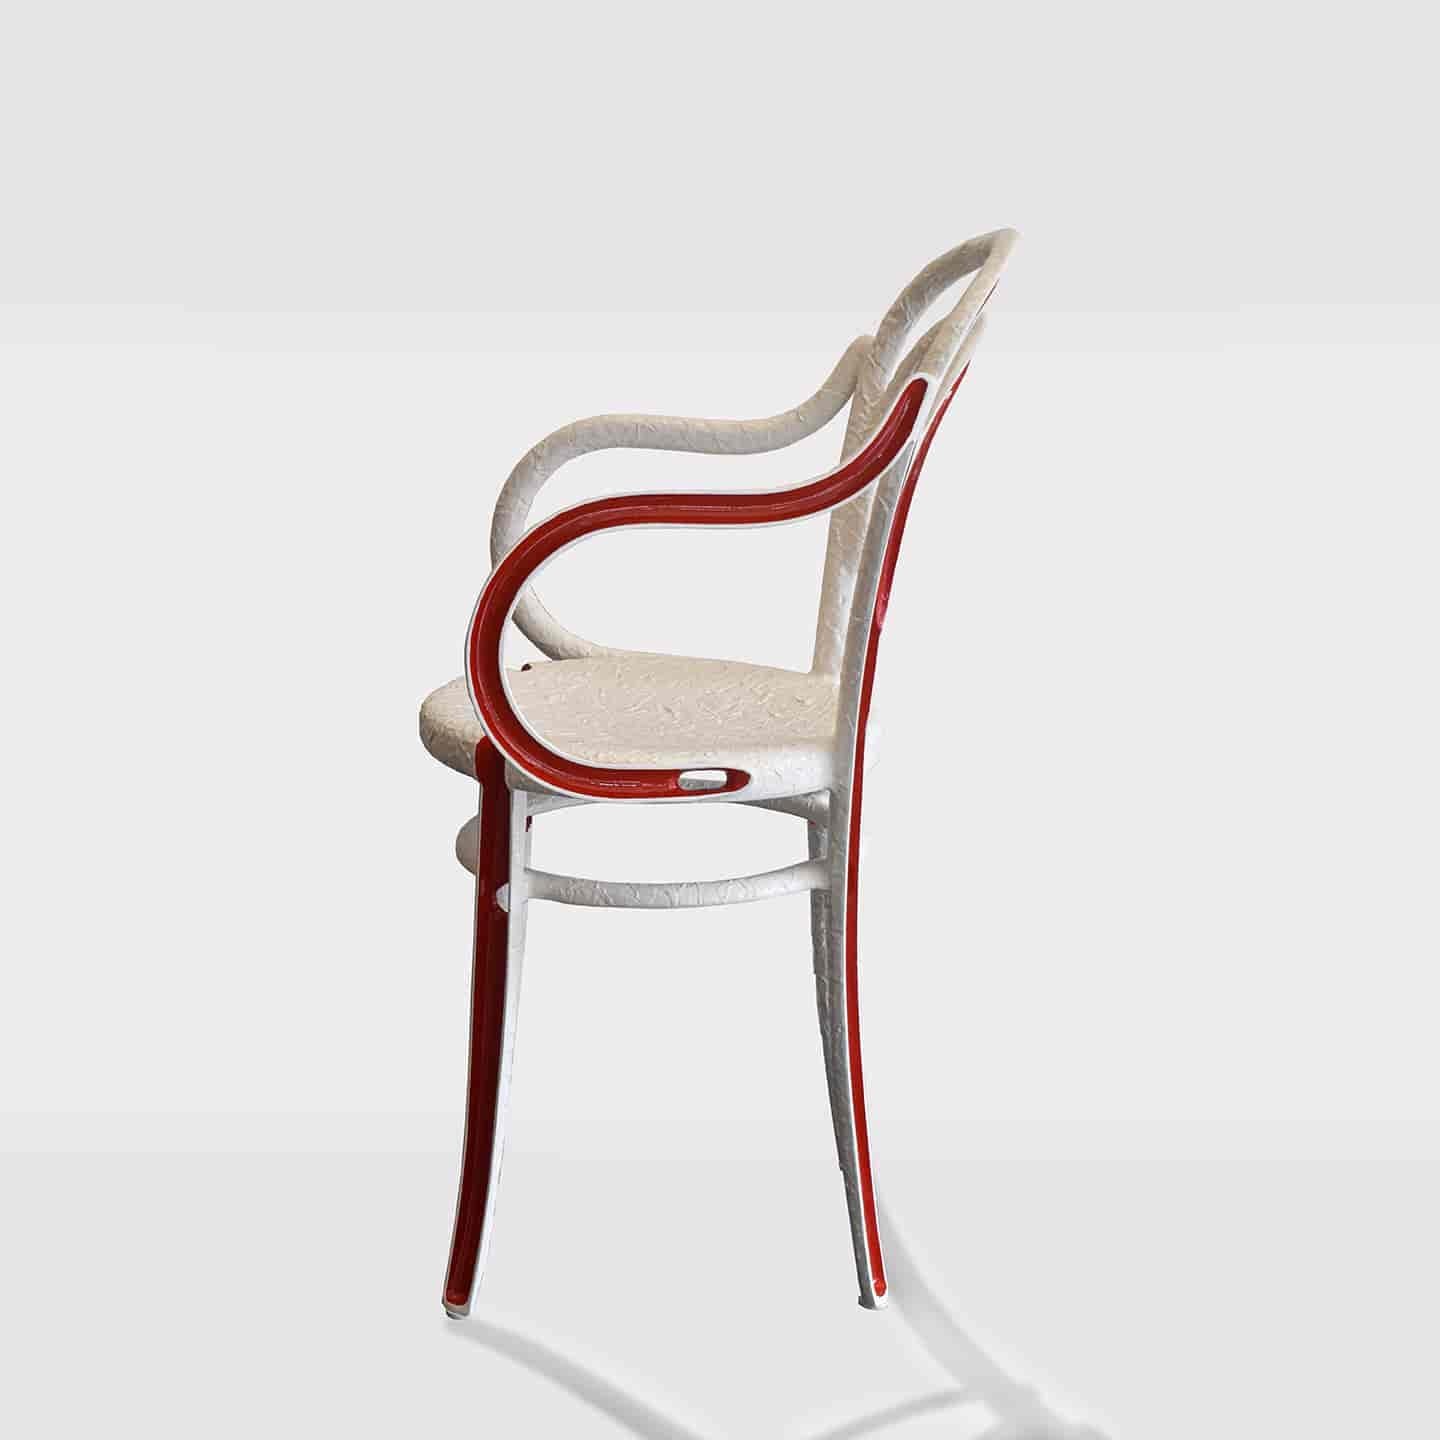 Rethonet is a tribute to the great classic 'chair no. 14 'designed by Michael Thonet in 1860. While Michael Thonet shaped the chair with steam, Andrea Salvetti gave shape to his re-Thonet with aluminum casting.

The structure and seat are in natural